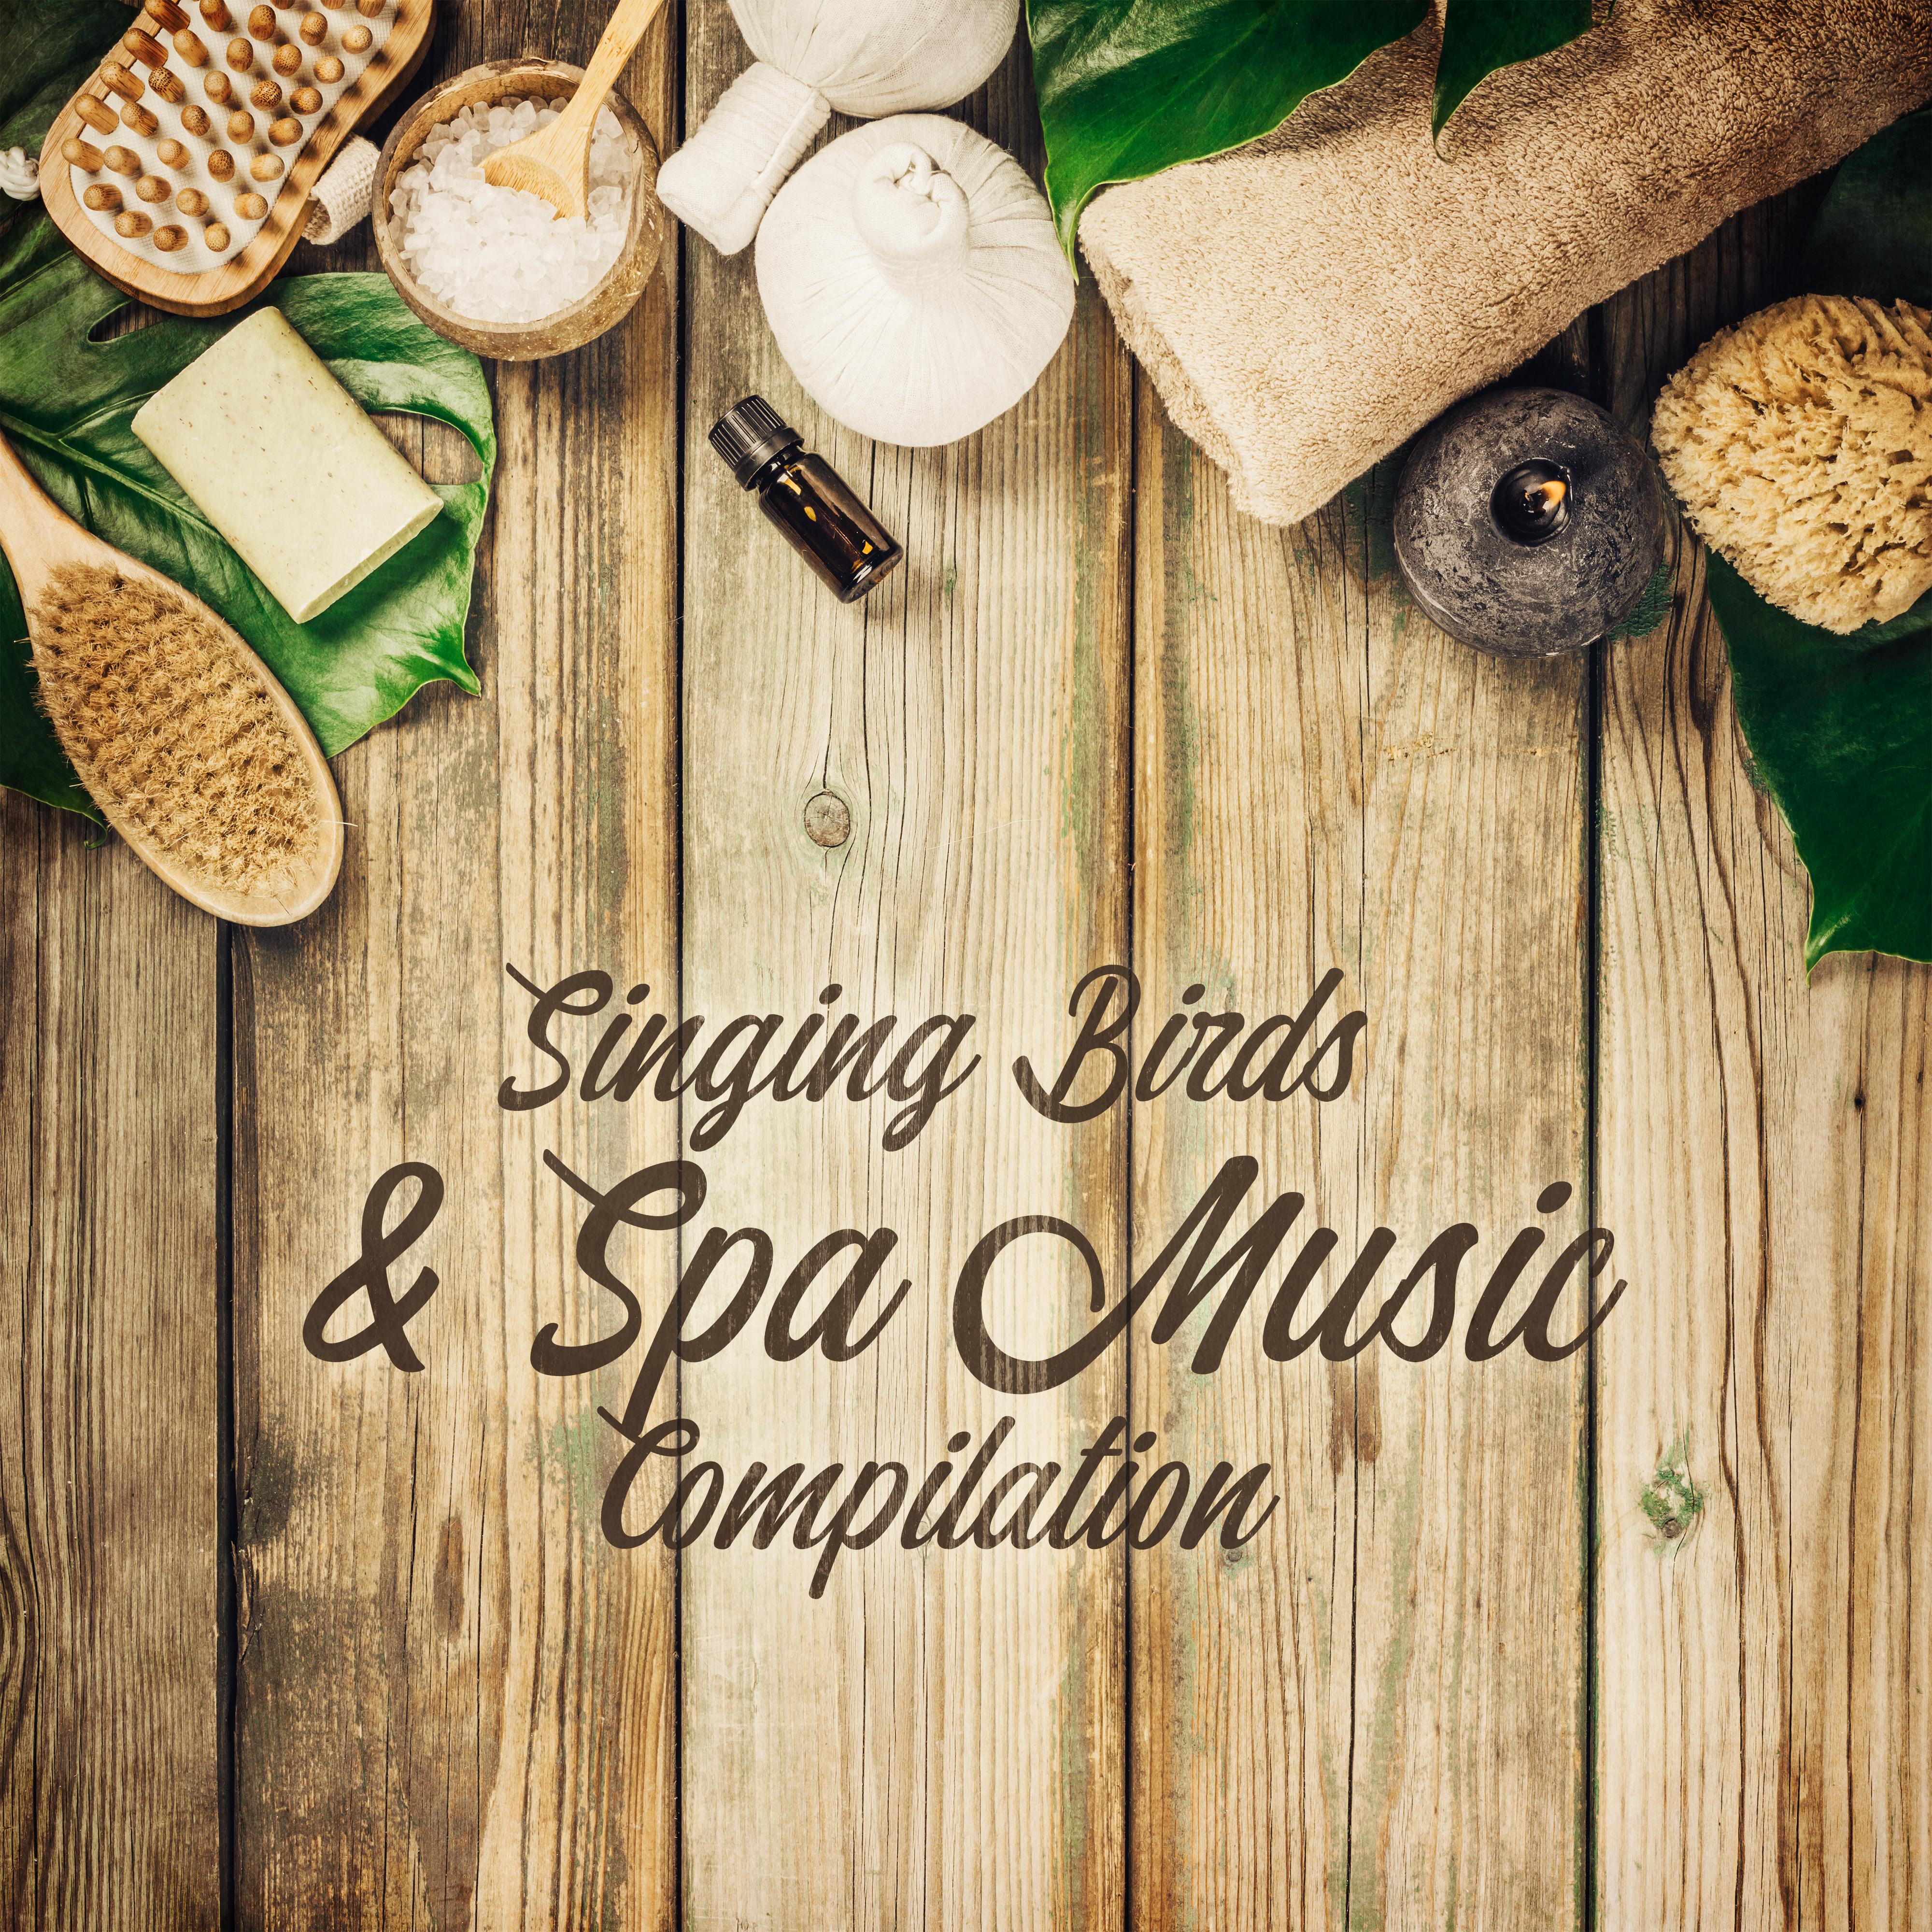 Singing Birds & Spa Music Compilation - Music for Relaxation, Massage, Rest Among the Sounds of Nature, Relaxation Treatments, a Refreshing Bath and for Moments of Blissful Chillout